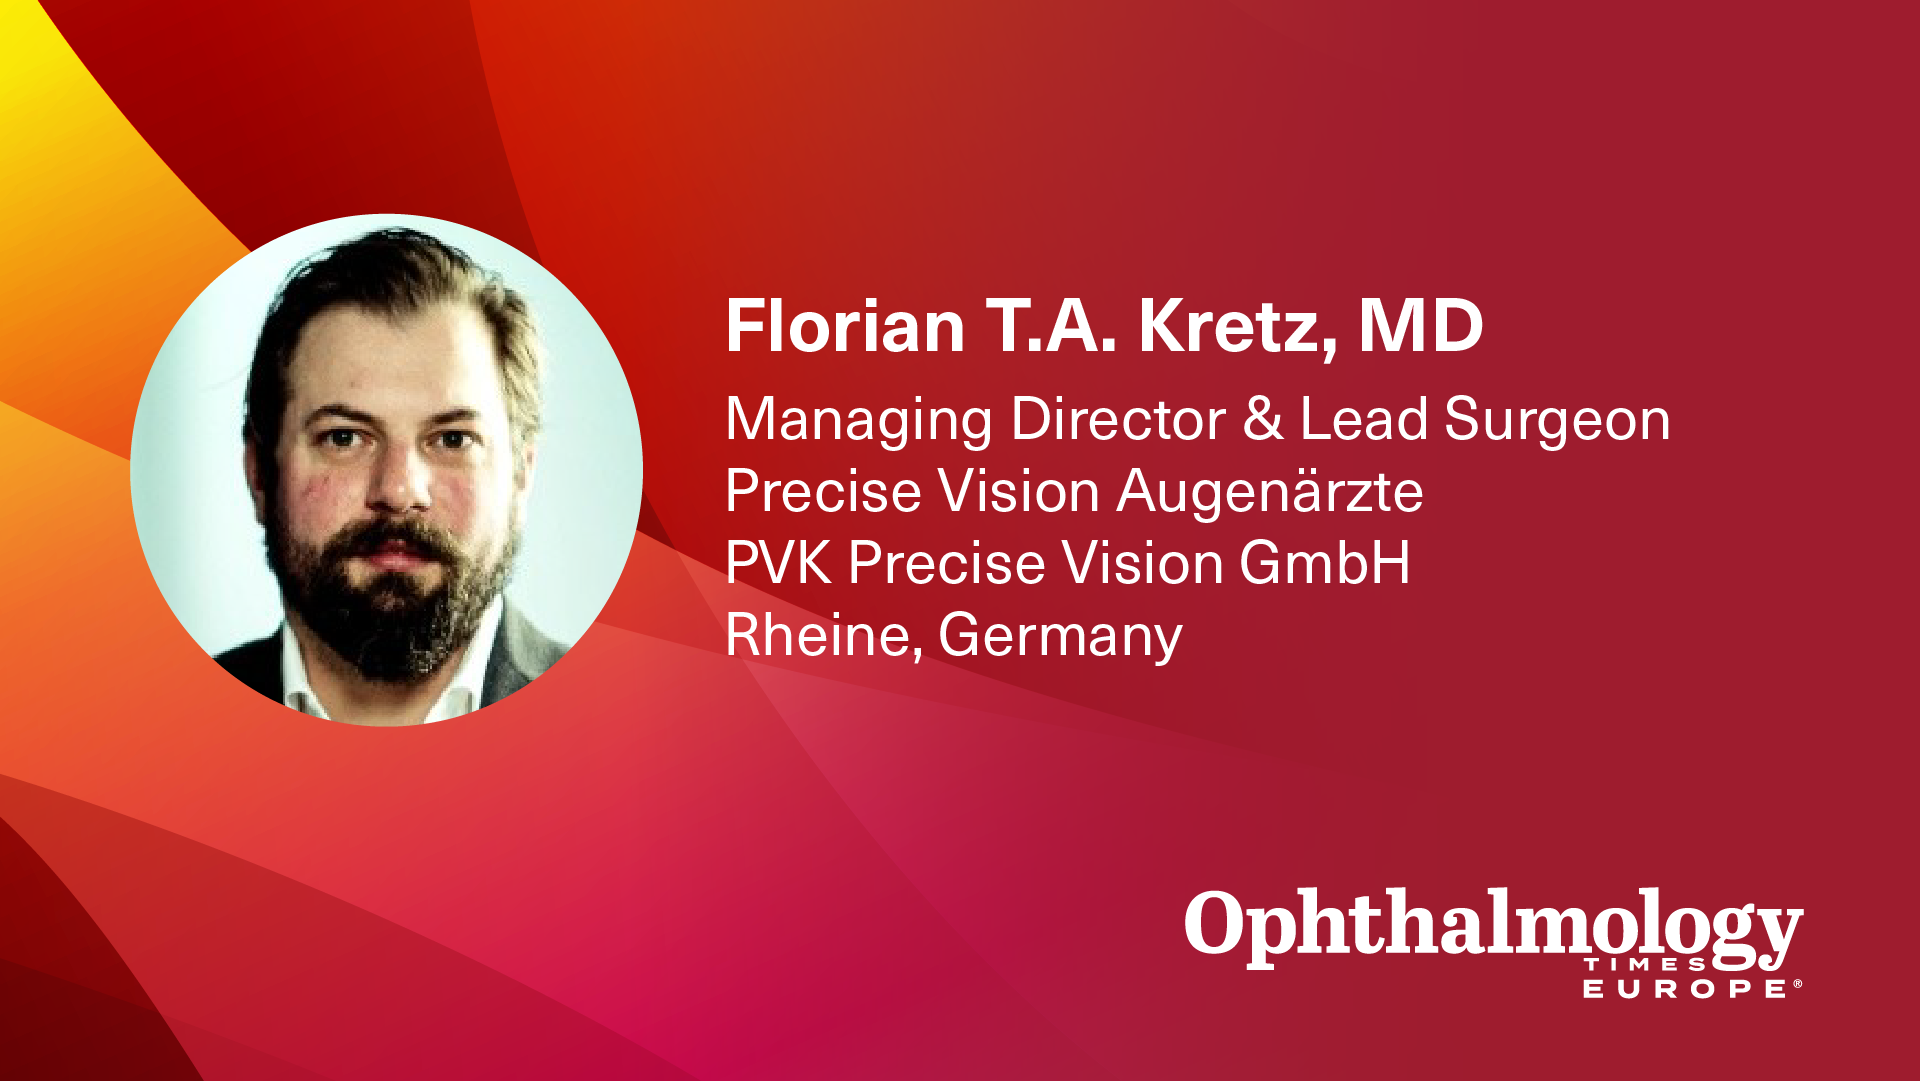 Part 4: The advantages of a digital workflow in modern cataract surgery